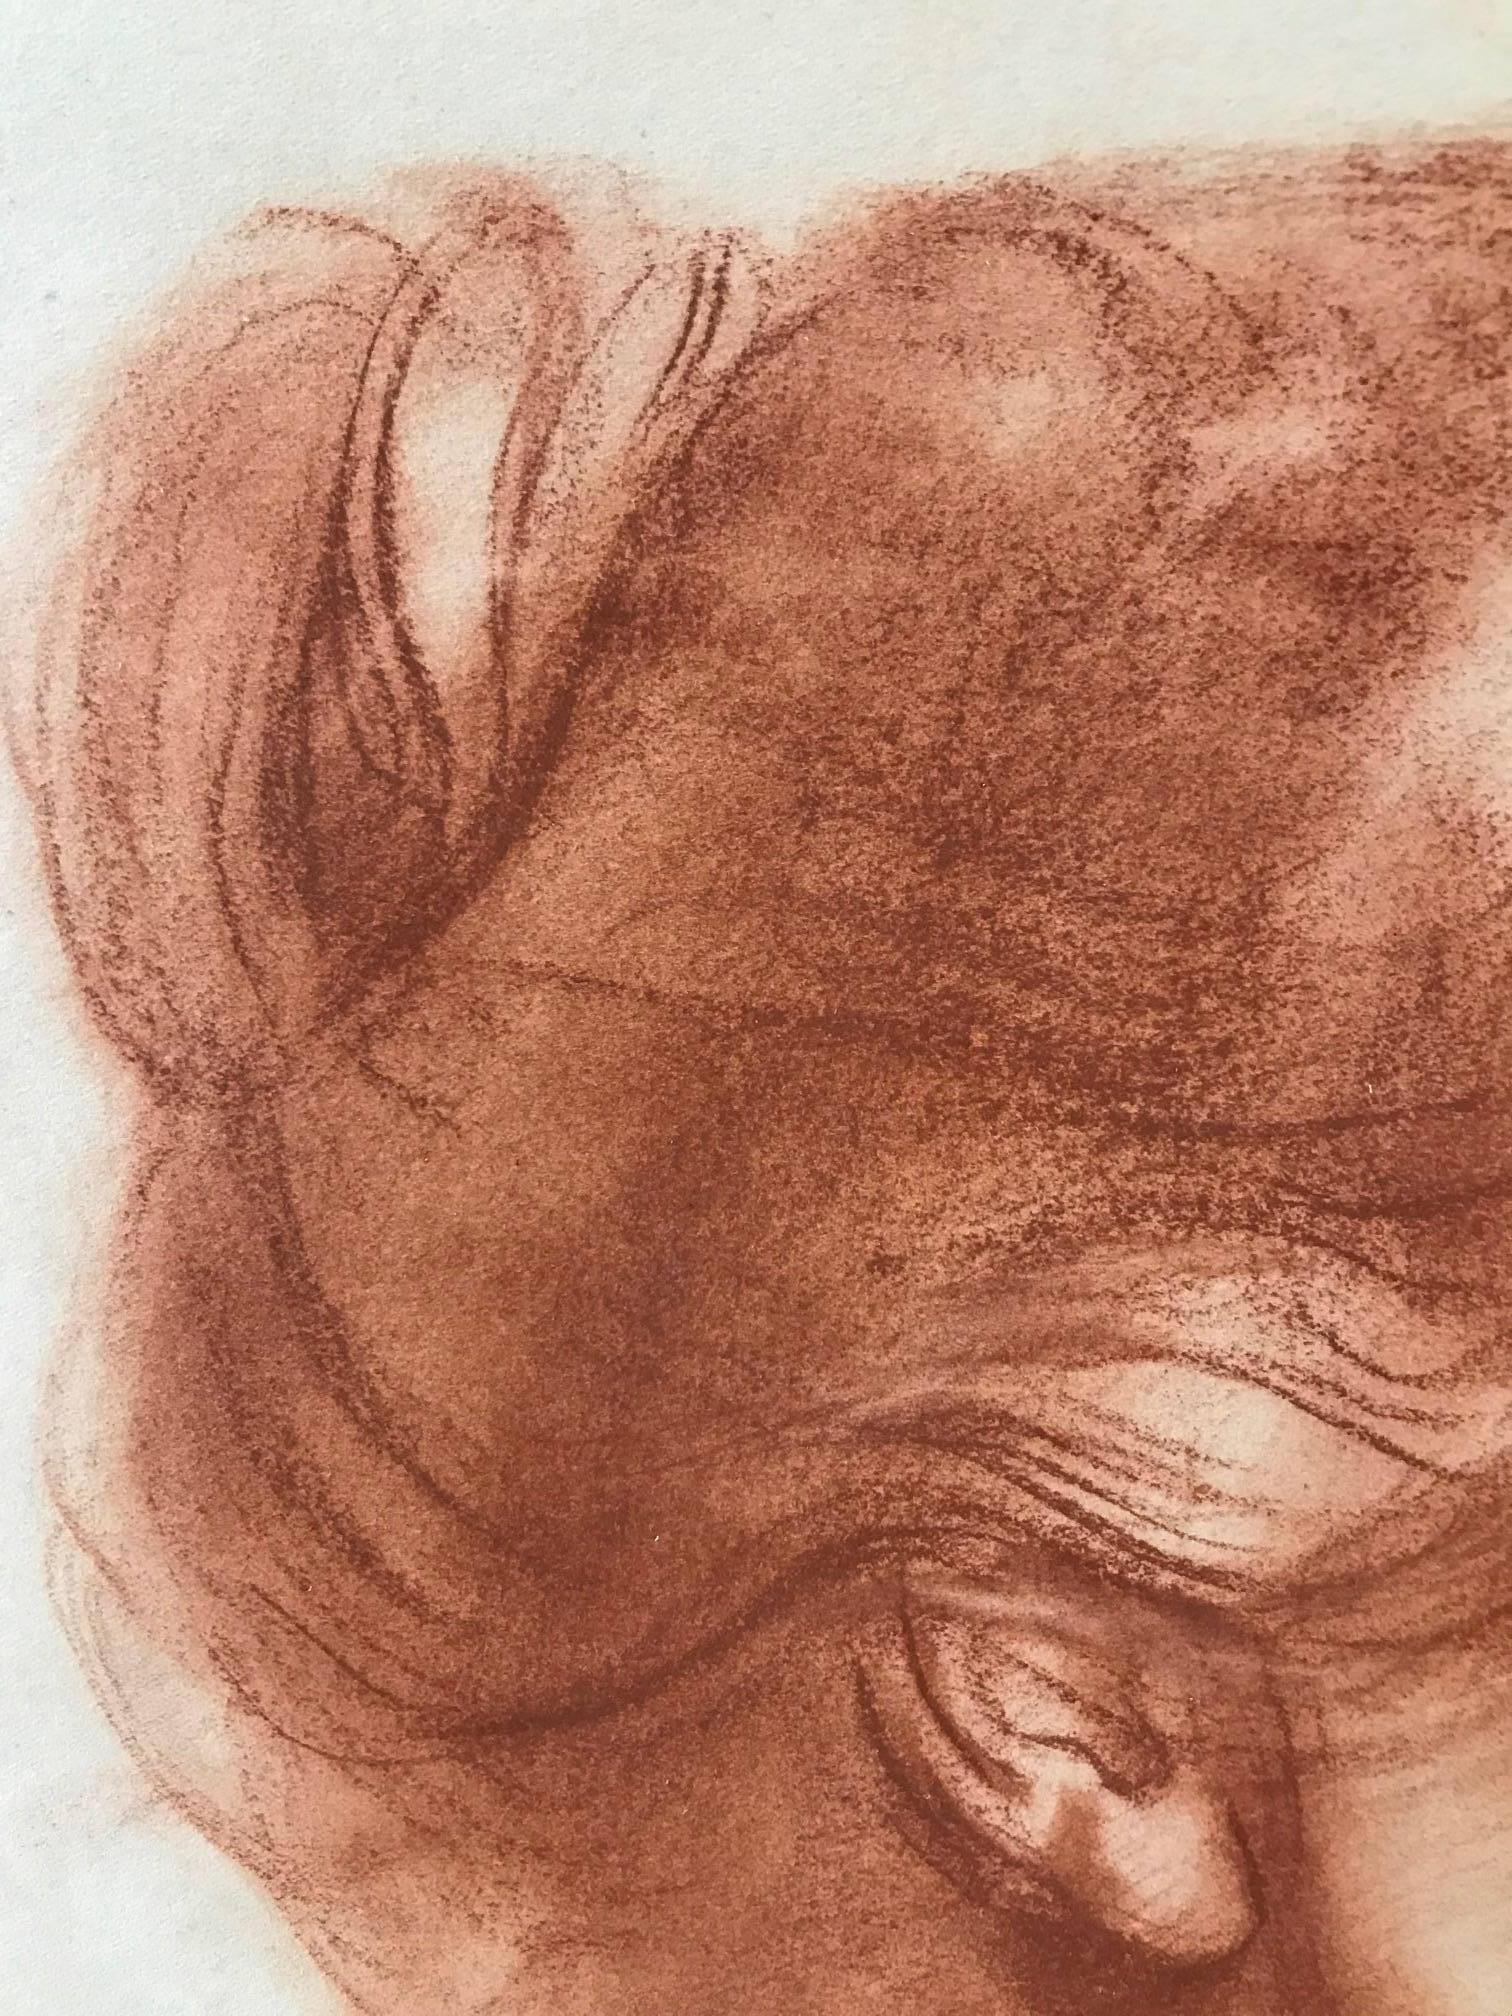 Venice (Red Charcoal Profile of an Elderly Lady) - Academic Art by John Gilroy